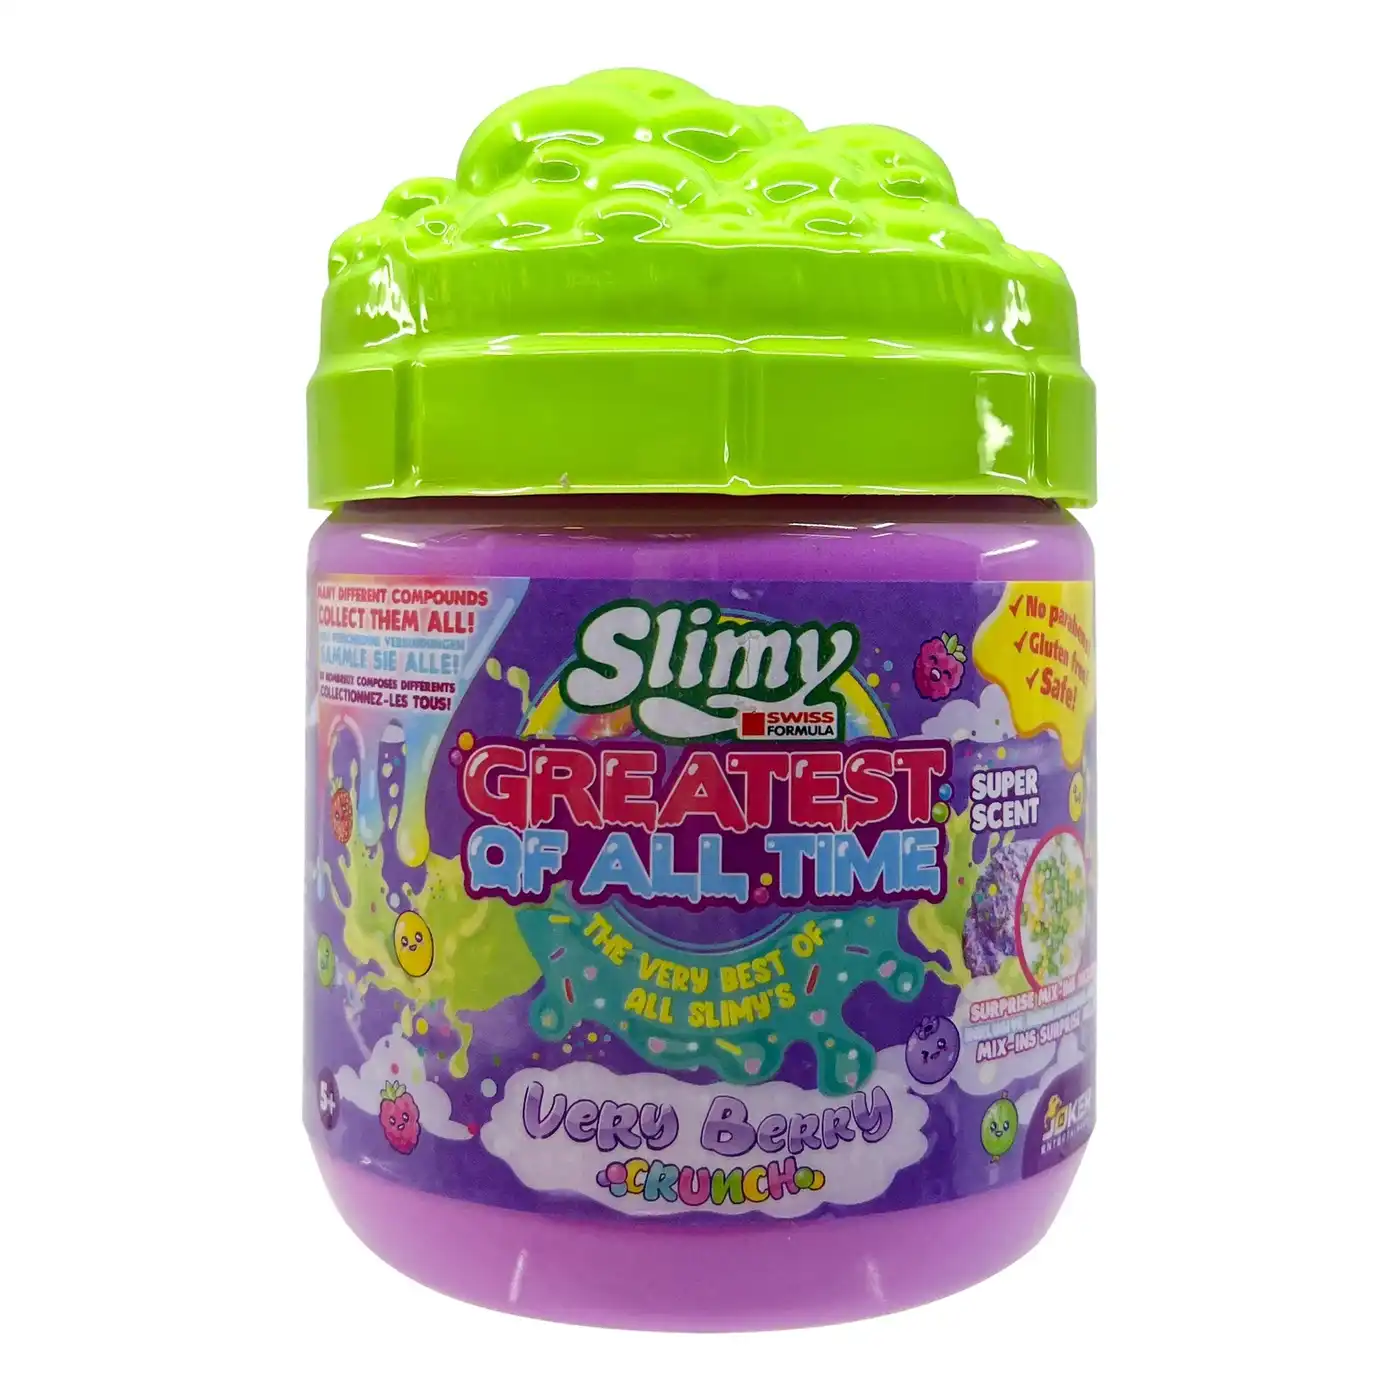 Slimy Greatest Of All Time 230g Cup With Mix-Ins Single Pack. Assorted